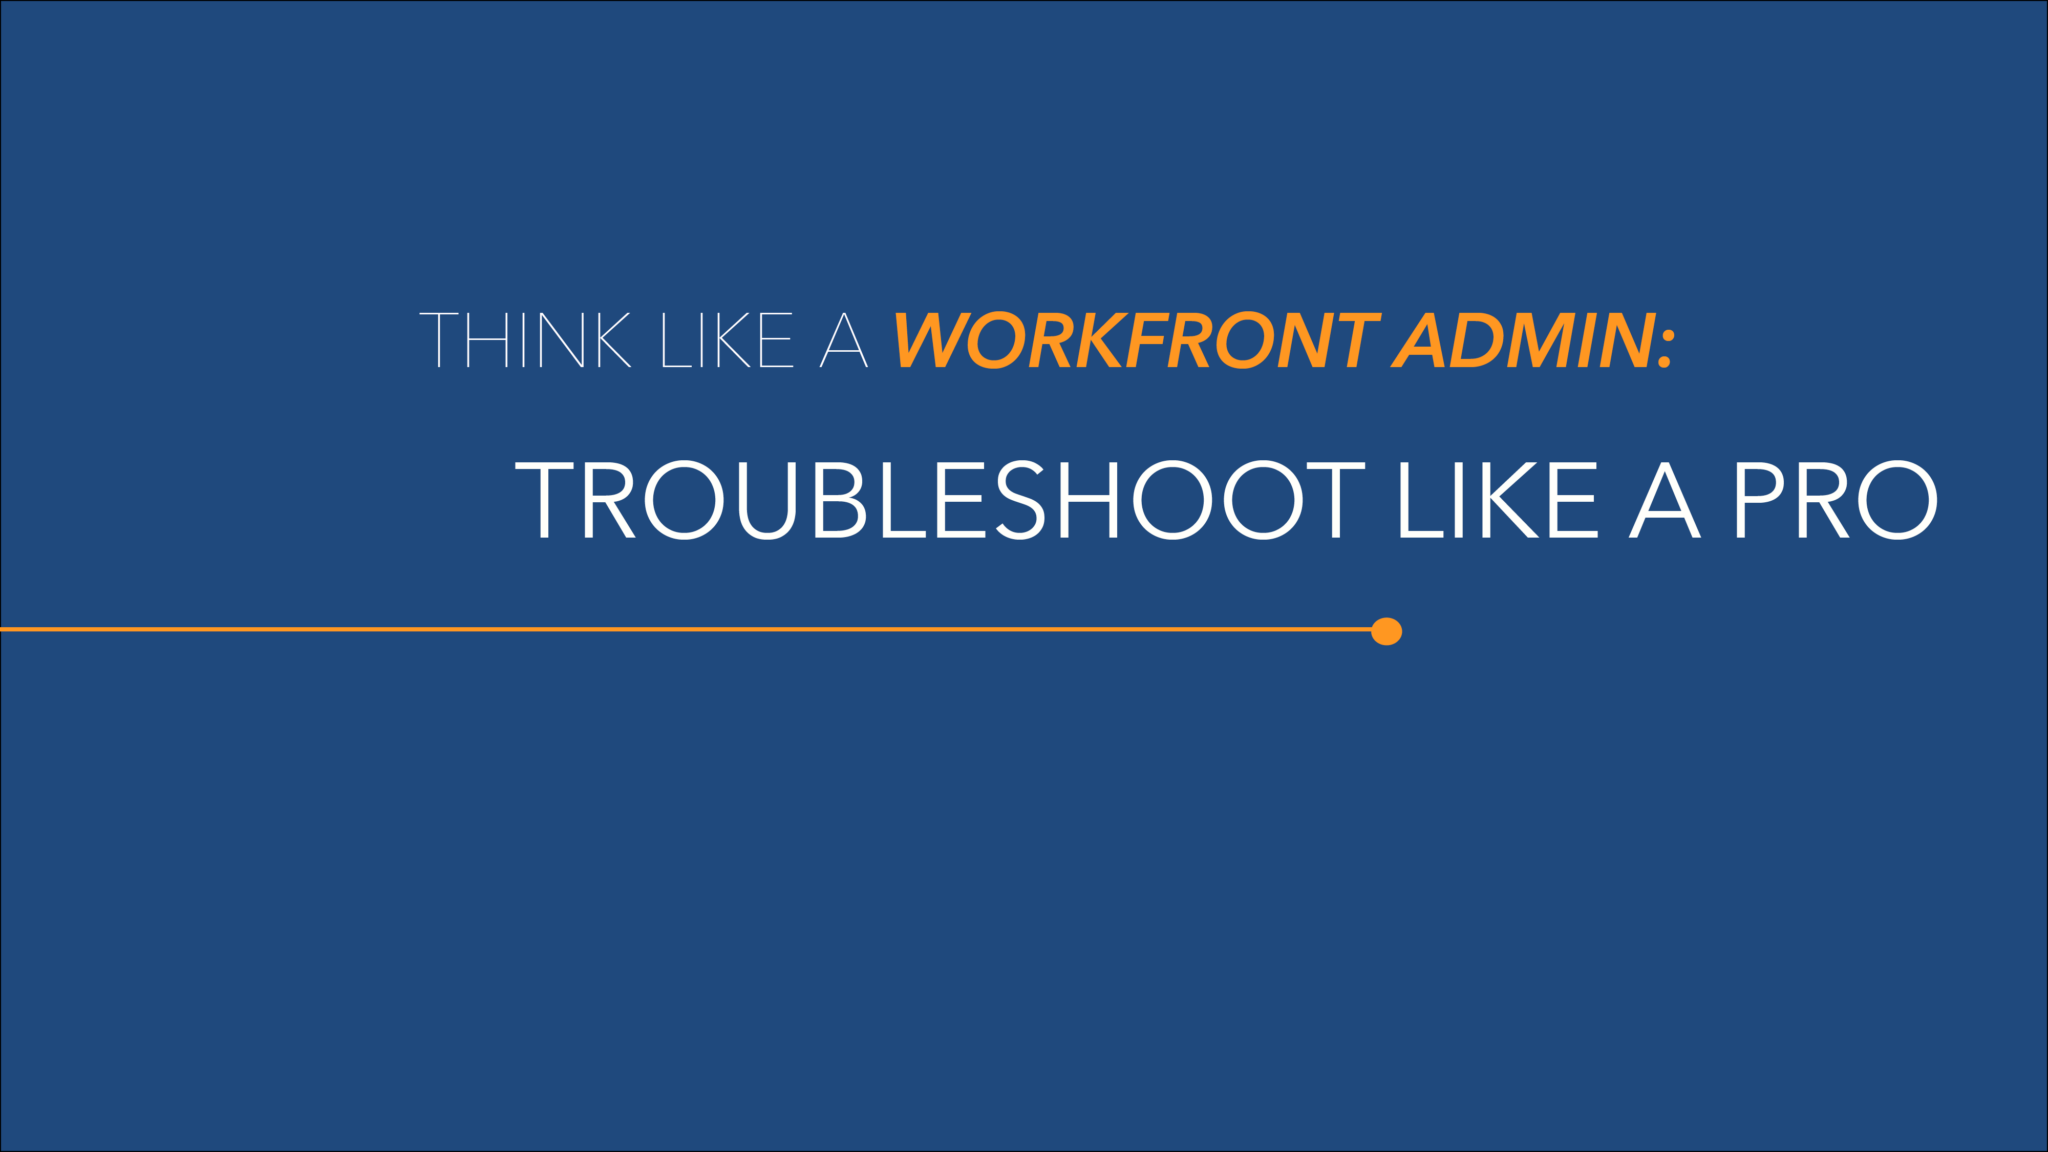 Think Live a Workfront Admin image